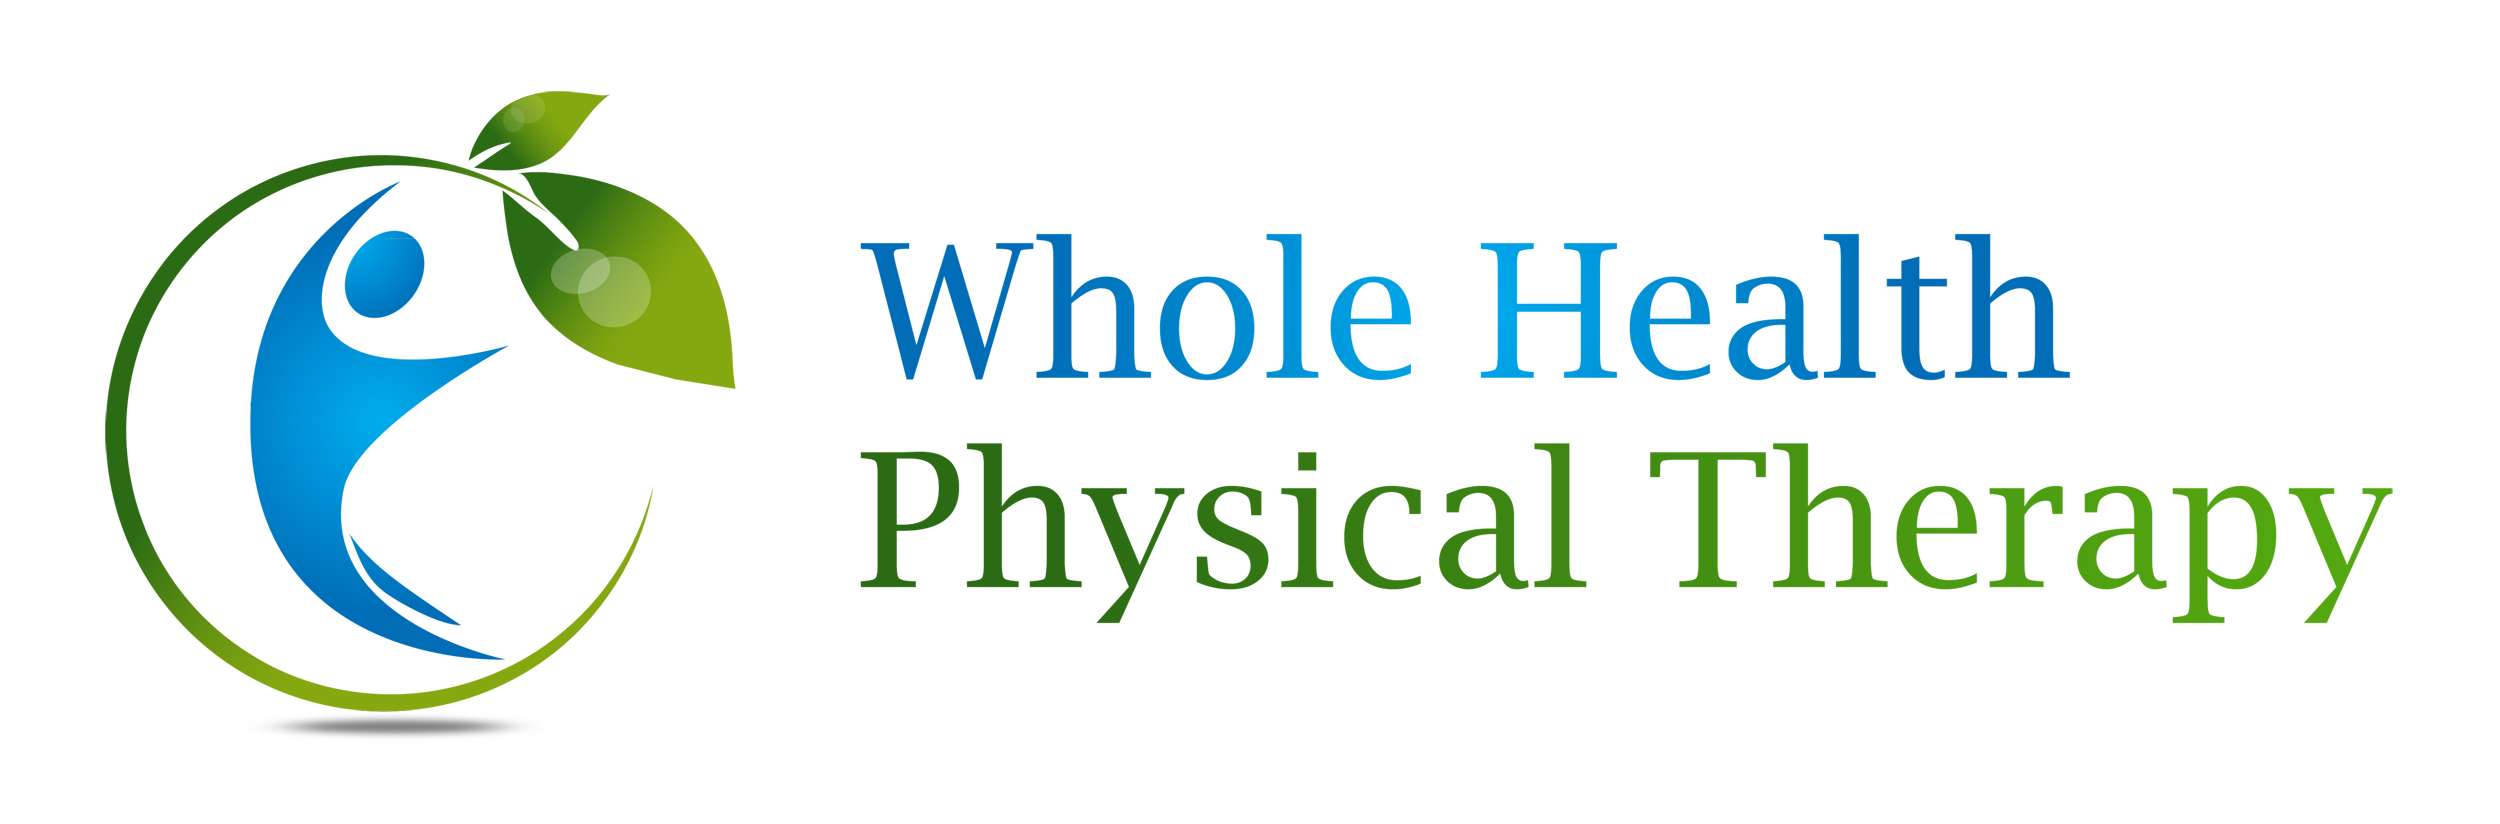 Whole Health Physical Therapy